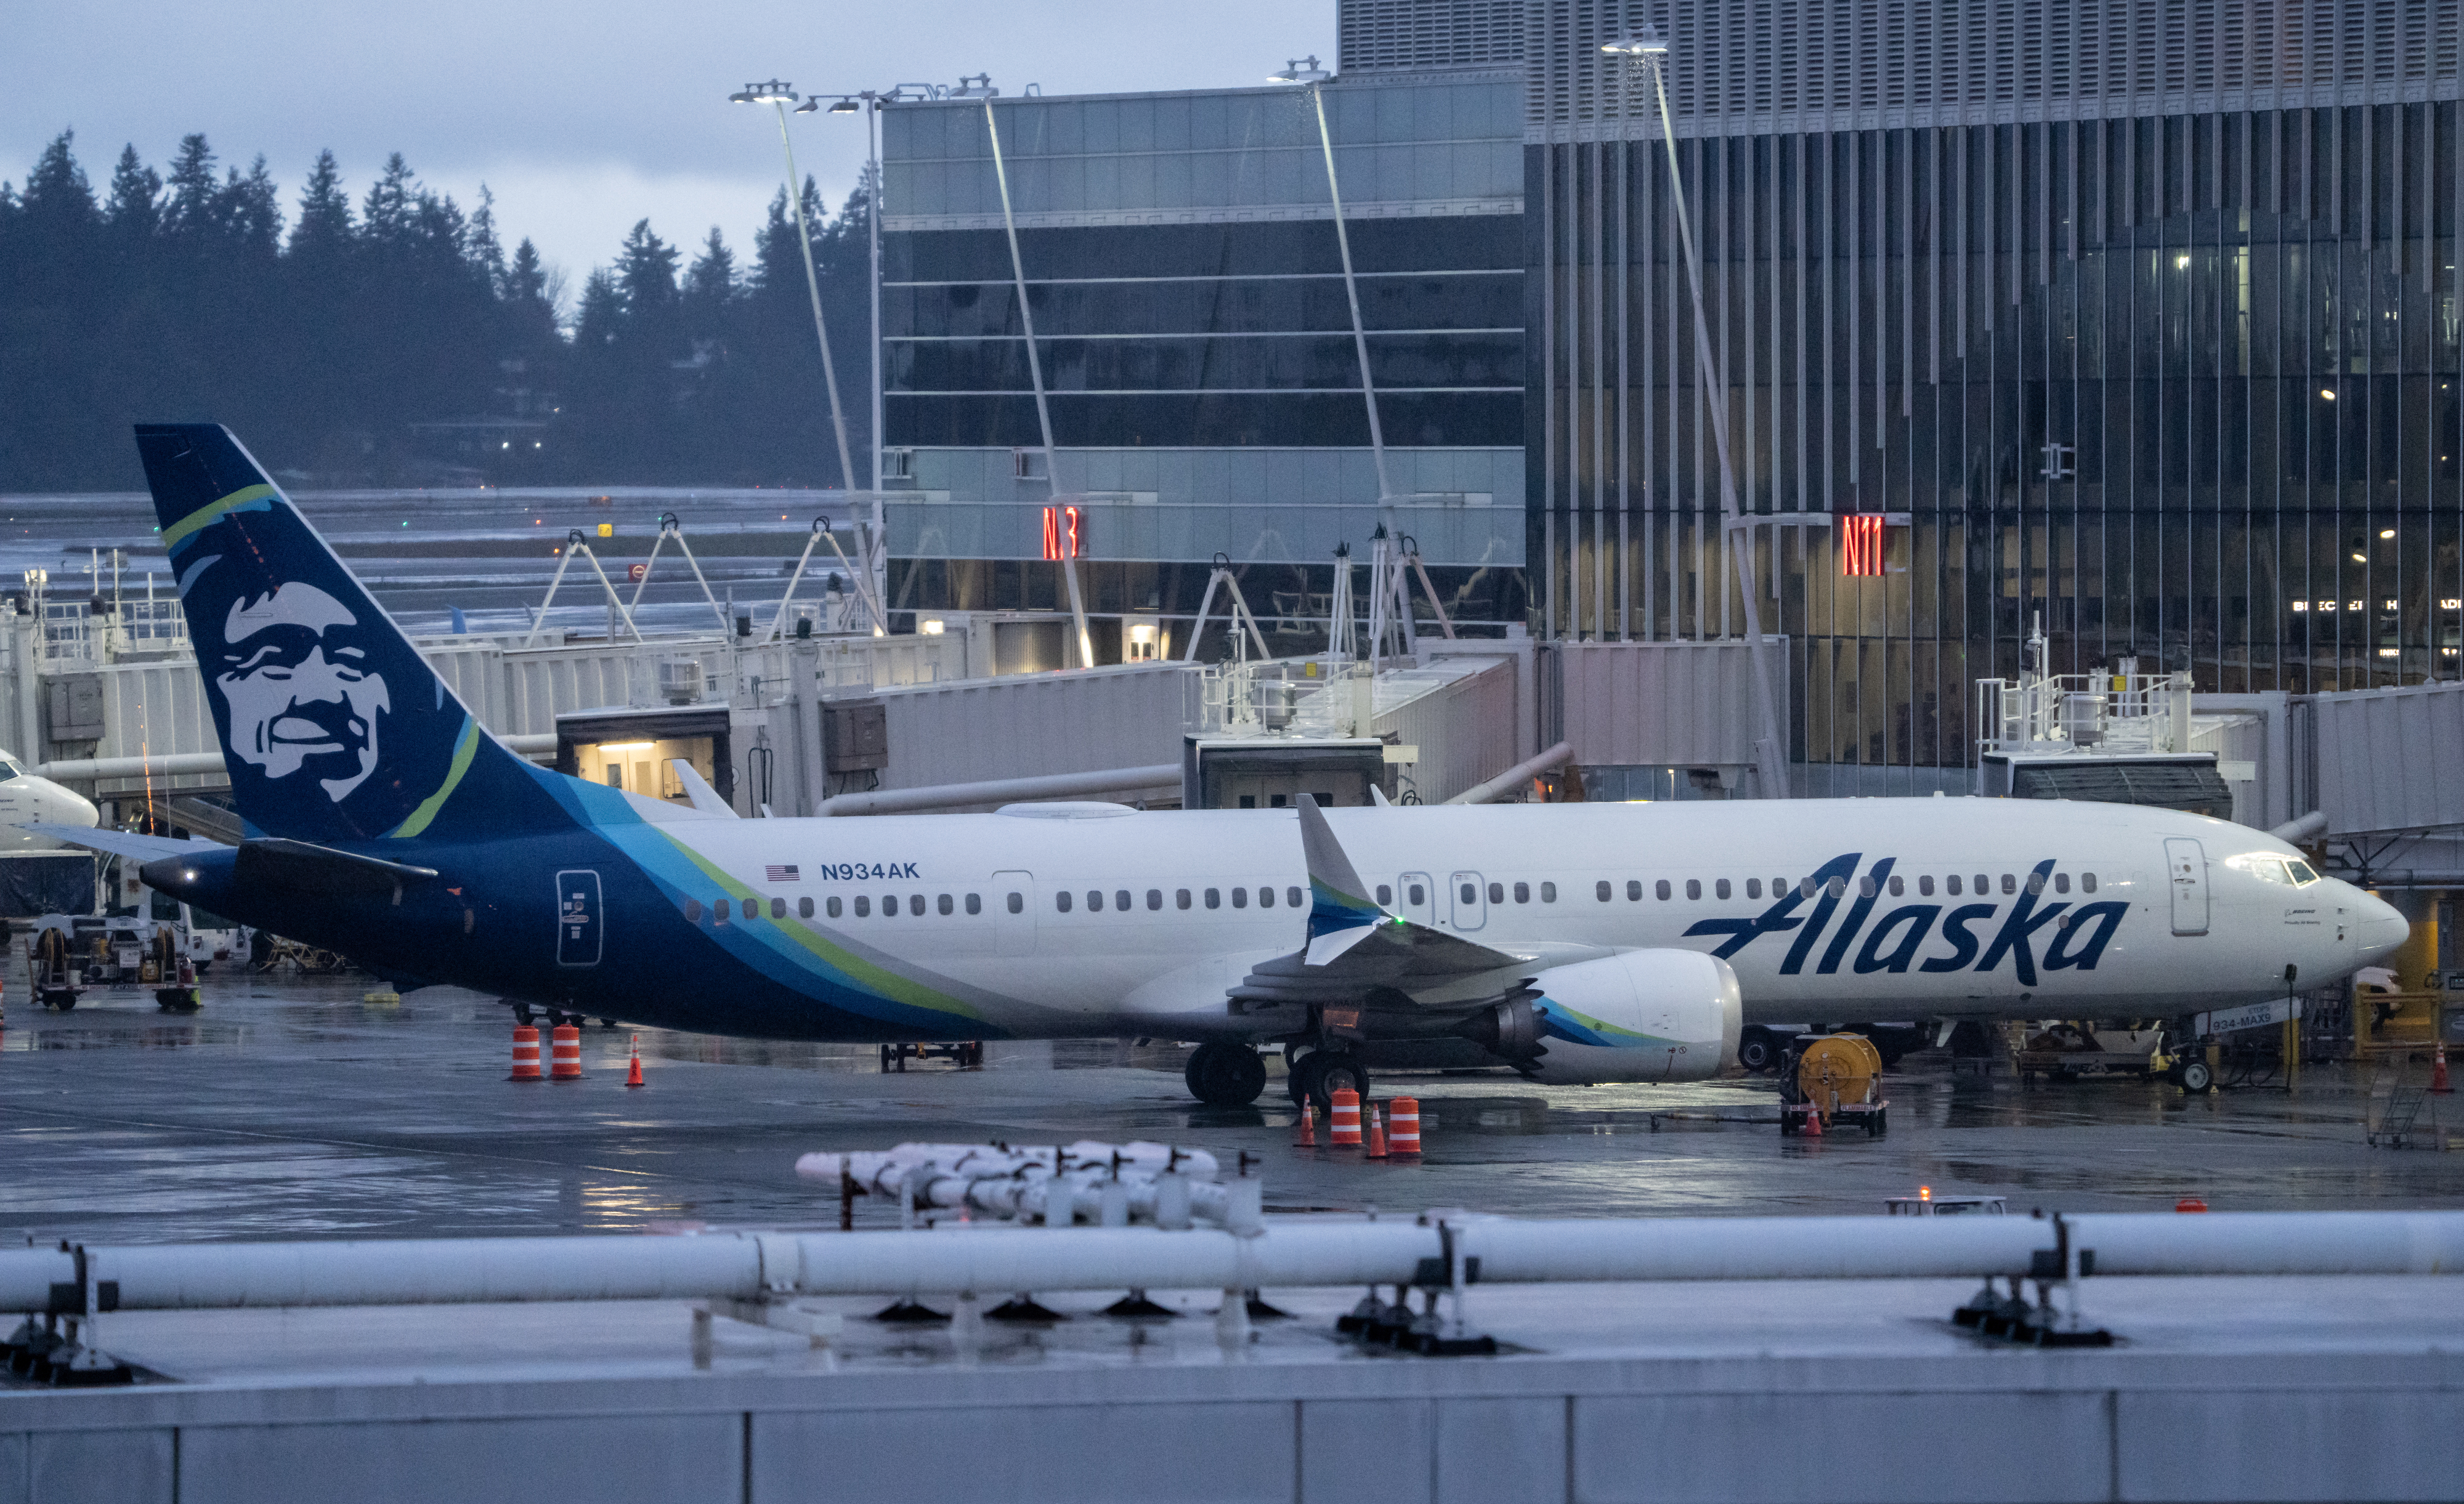 An Alaska Airlines plane on the tarmac